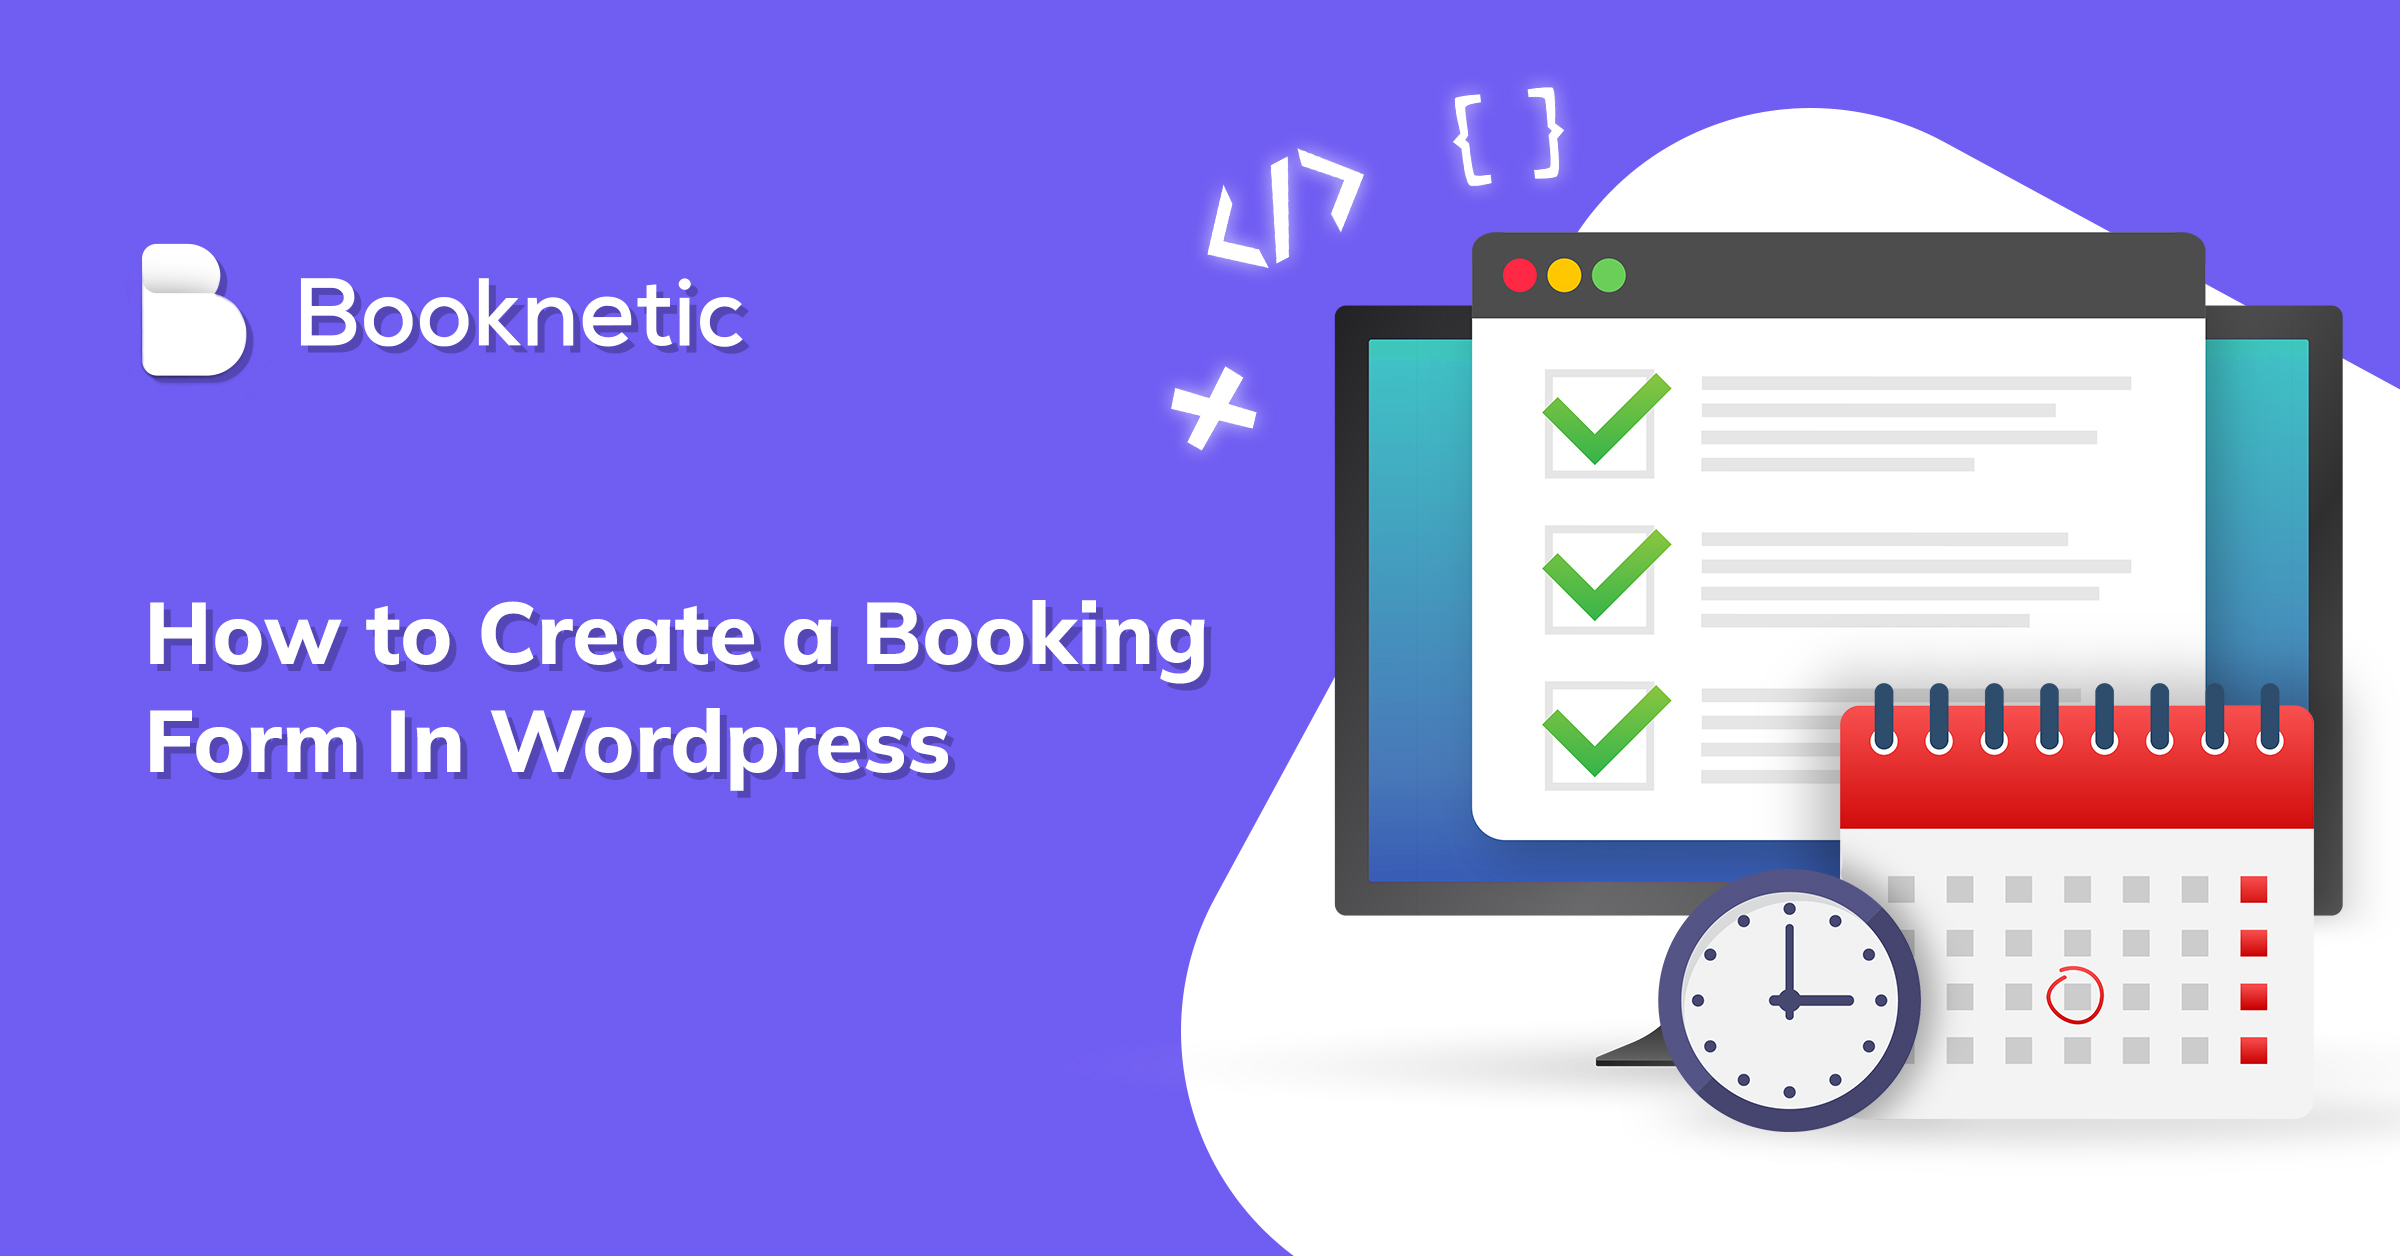 How to Create a Booking Form in WordPress?